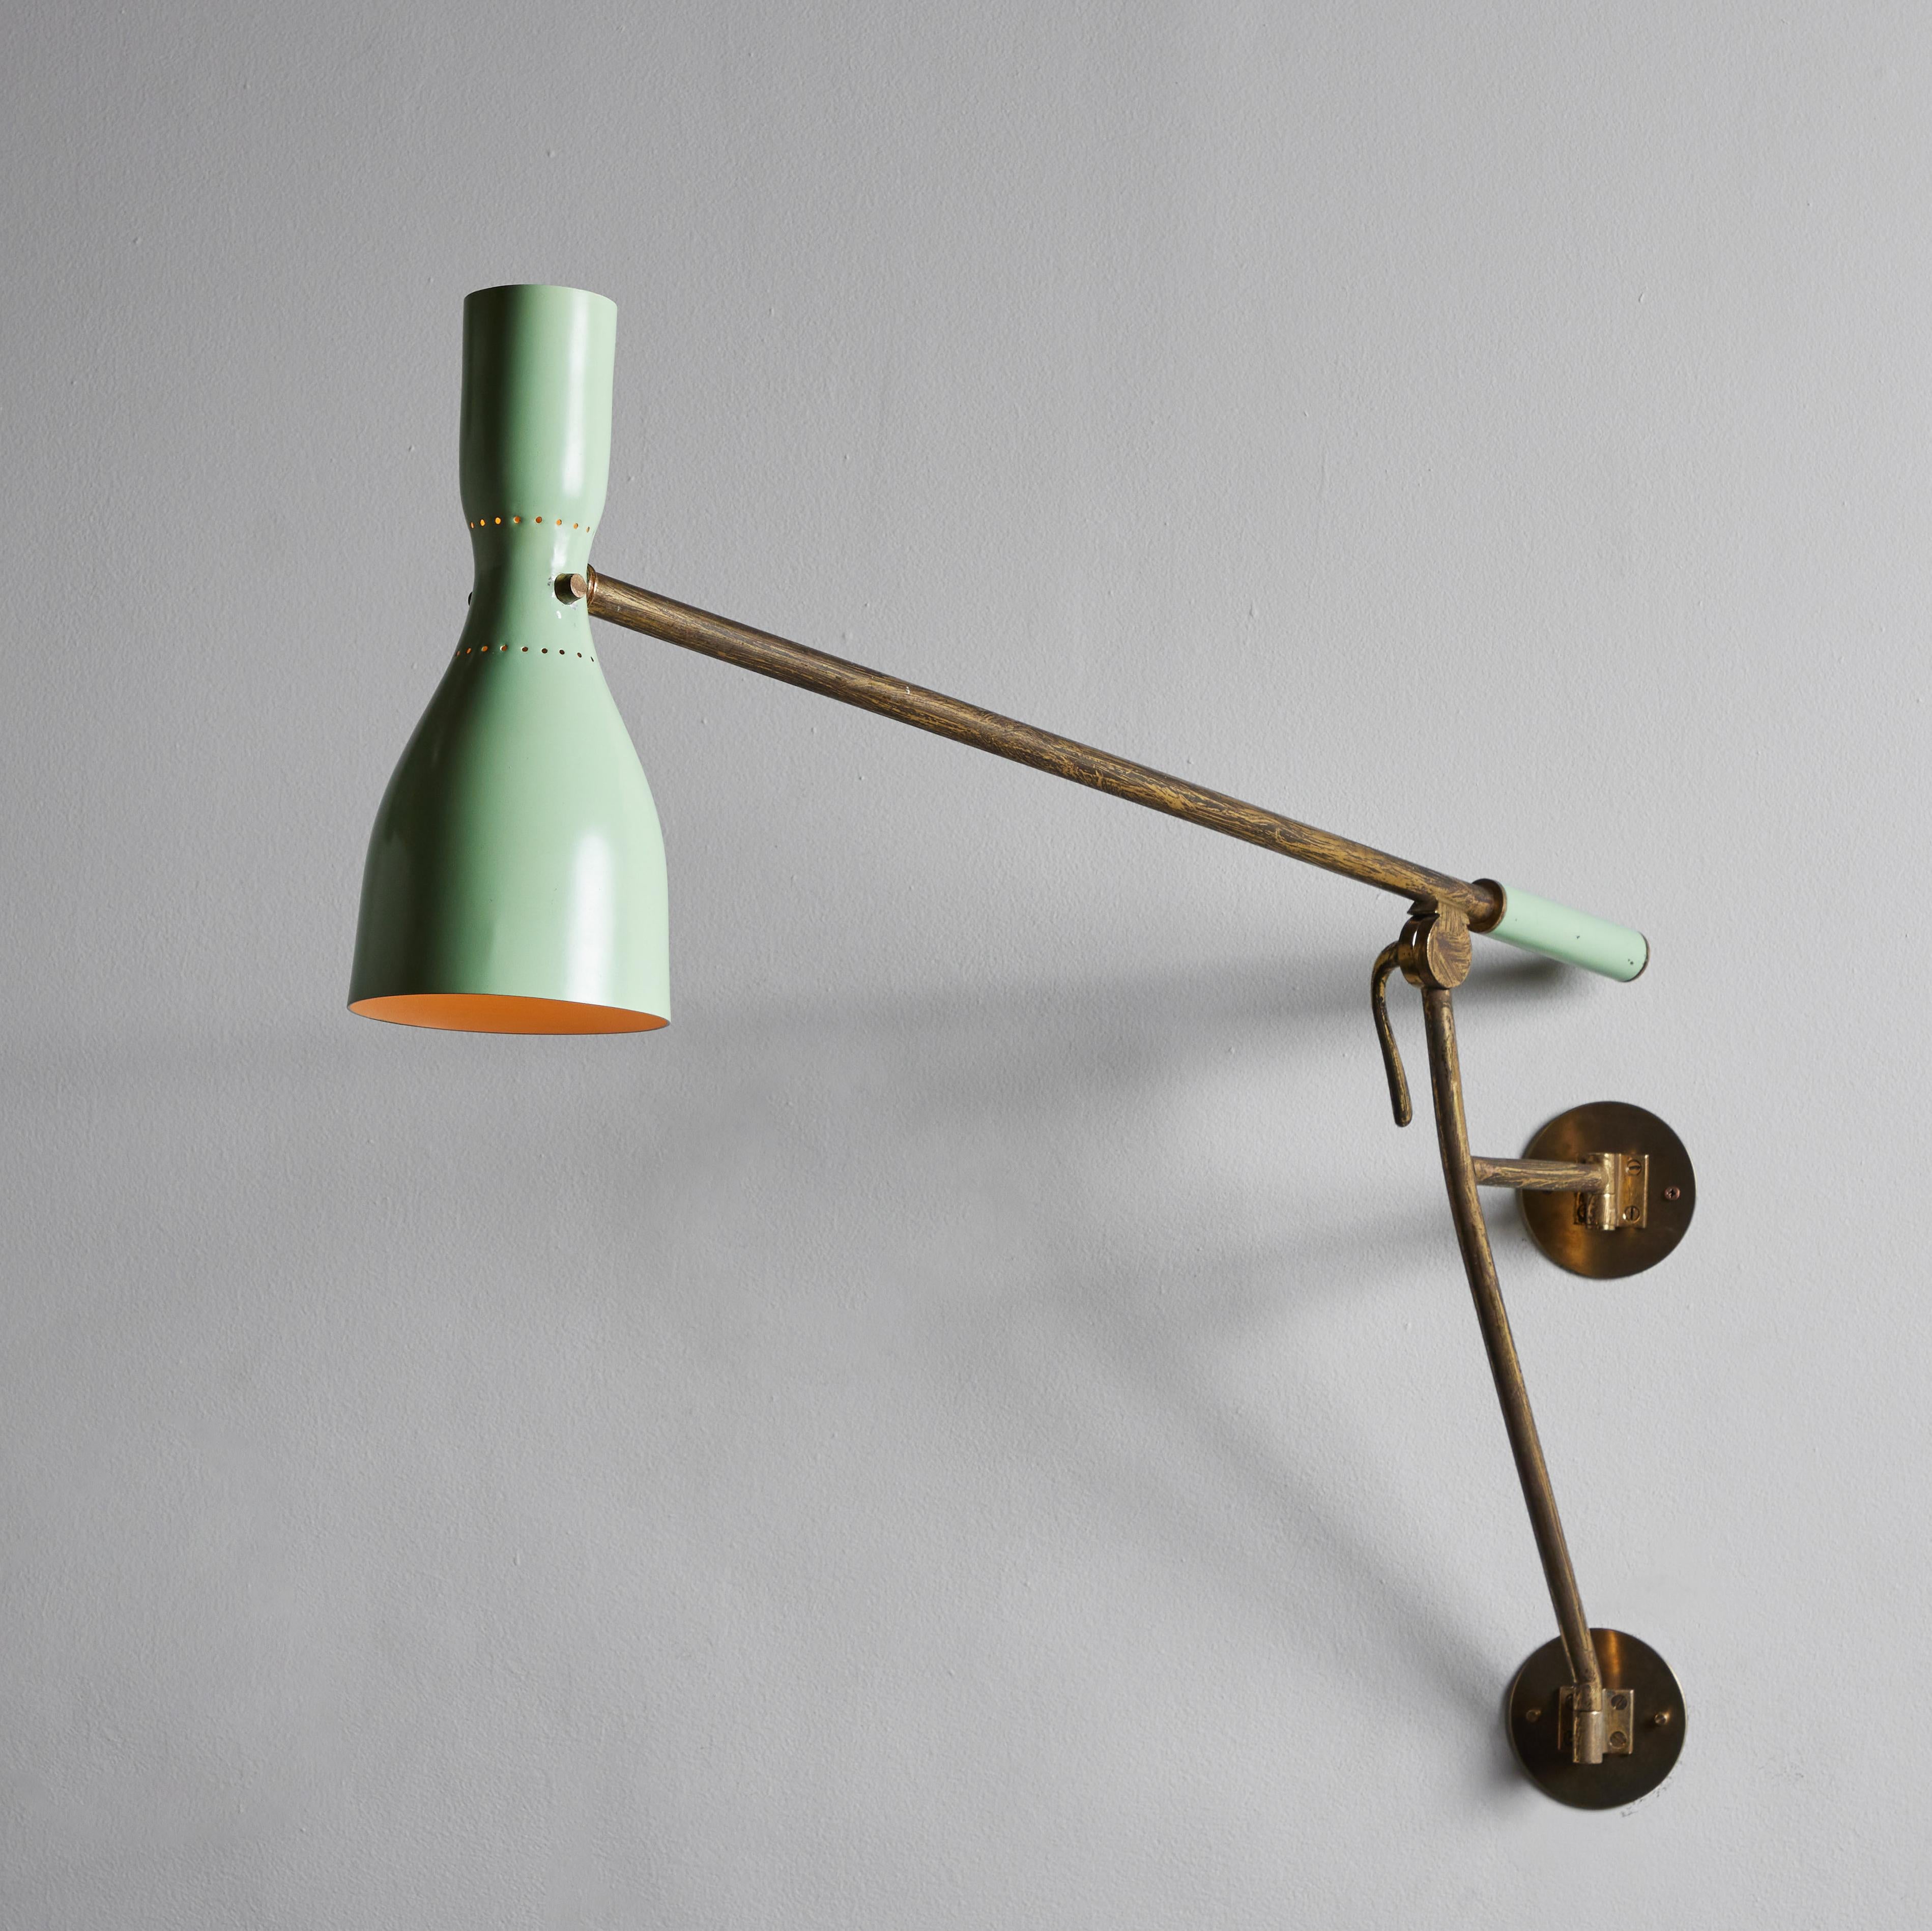 Rare wall light by Stilnovo. Designed and manufactured in Italy, circa 1952. Enameled metal, brass. Custom Brass backplate. Shade and arm adjust to various positions. We recommend one E14 European candelabra 60w maximum bulb. Bulbs provided as a one